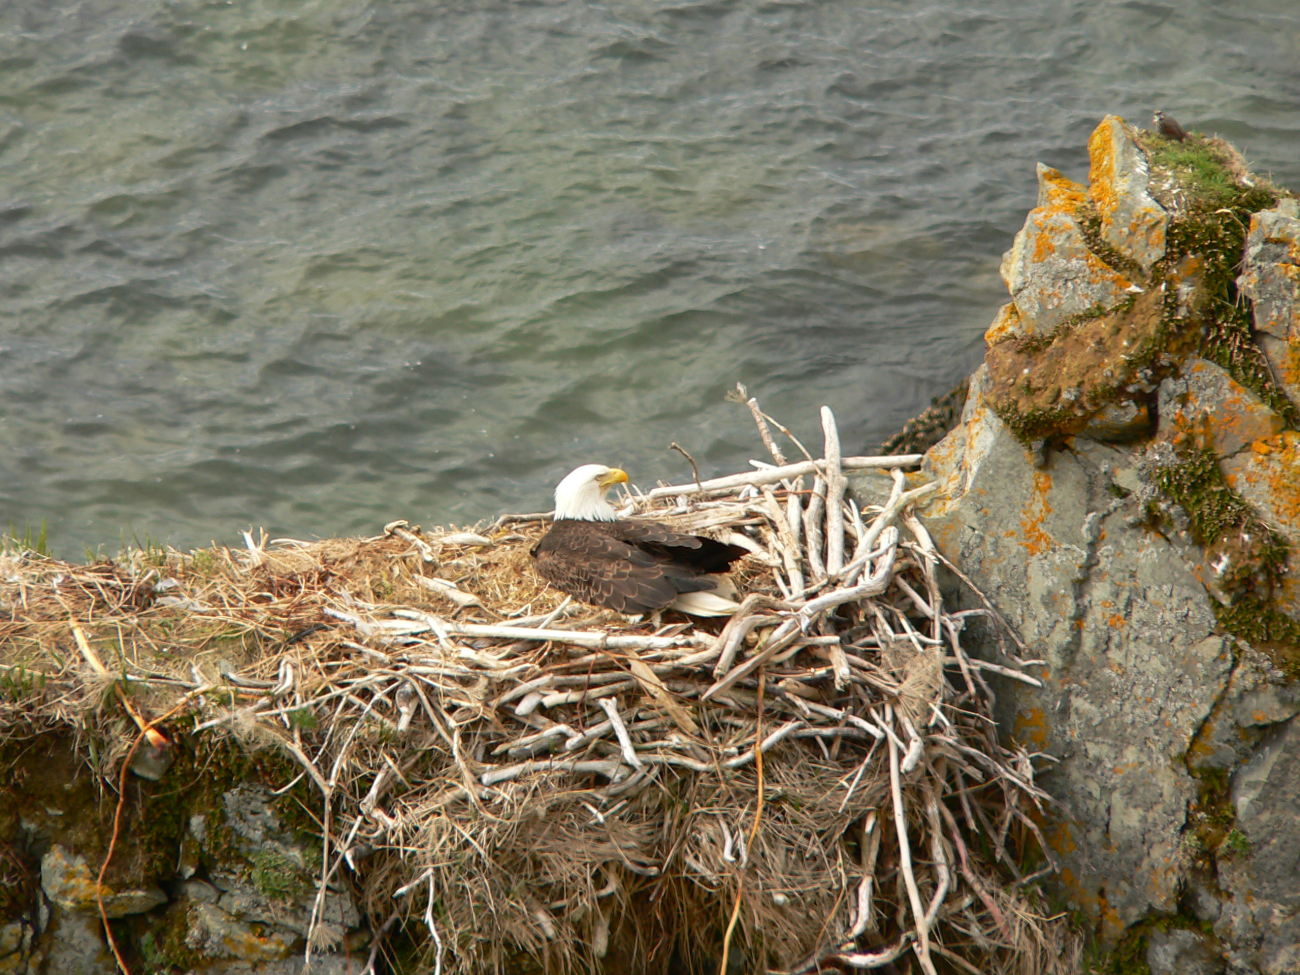 Bald eagle in nest